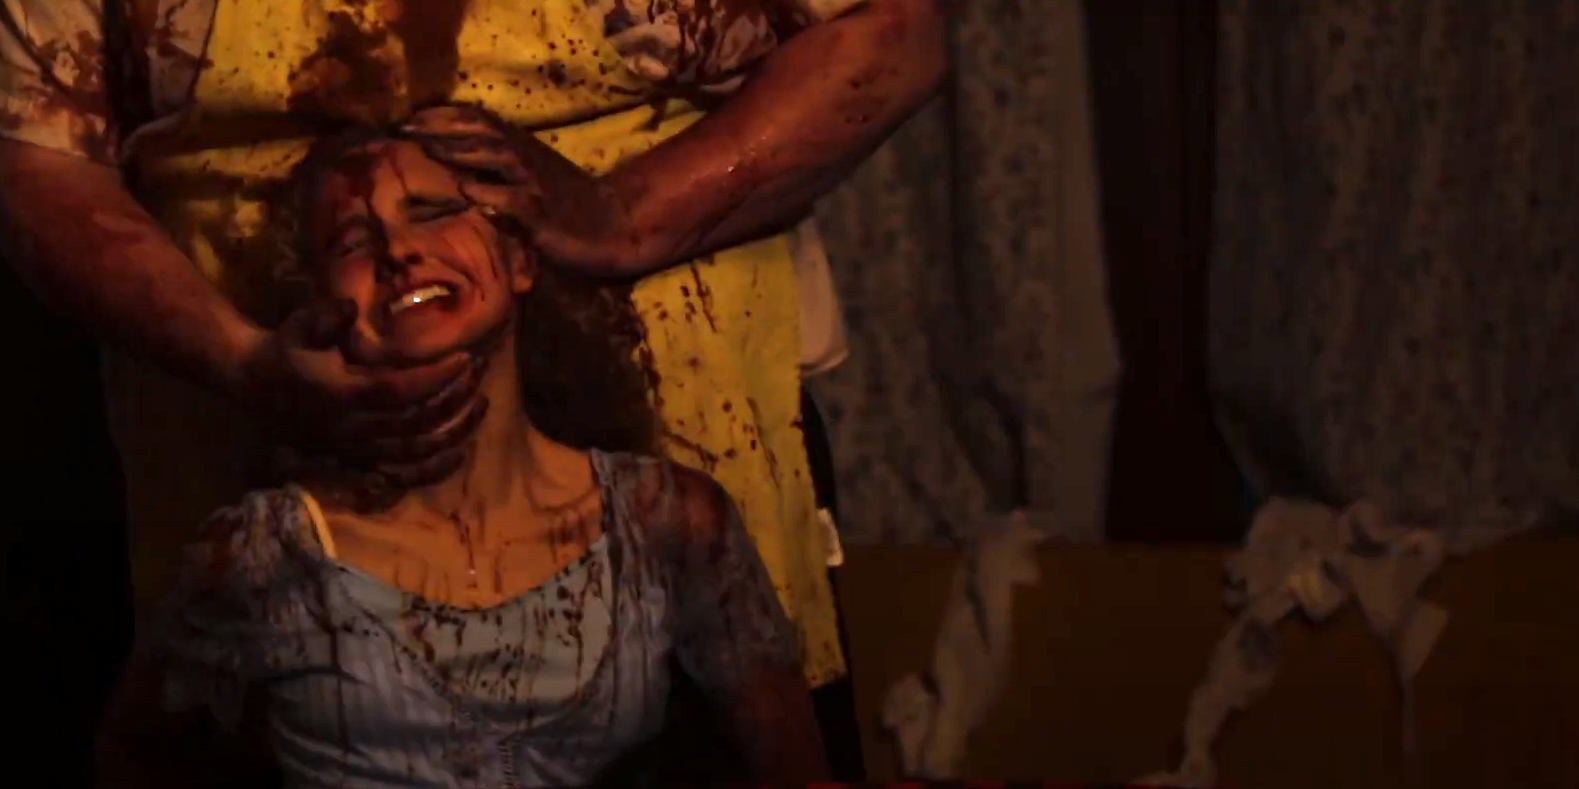 The Trailer Has Been Released Of The New Texas Chainsaw Massacre Fan ...